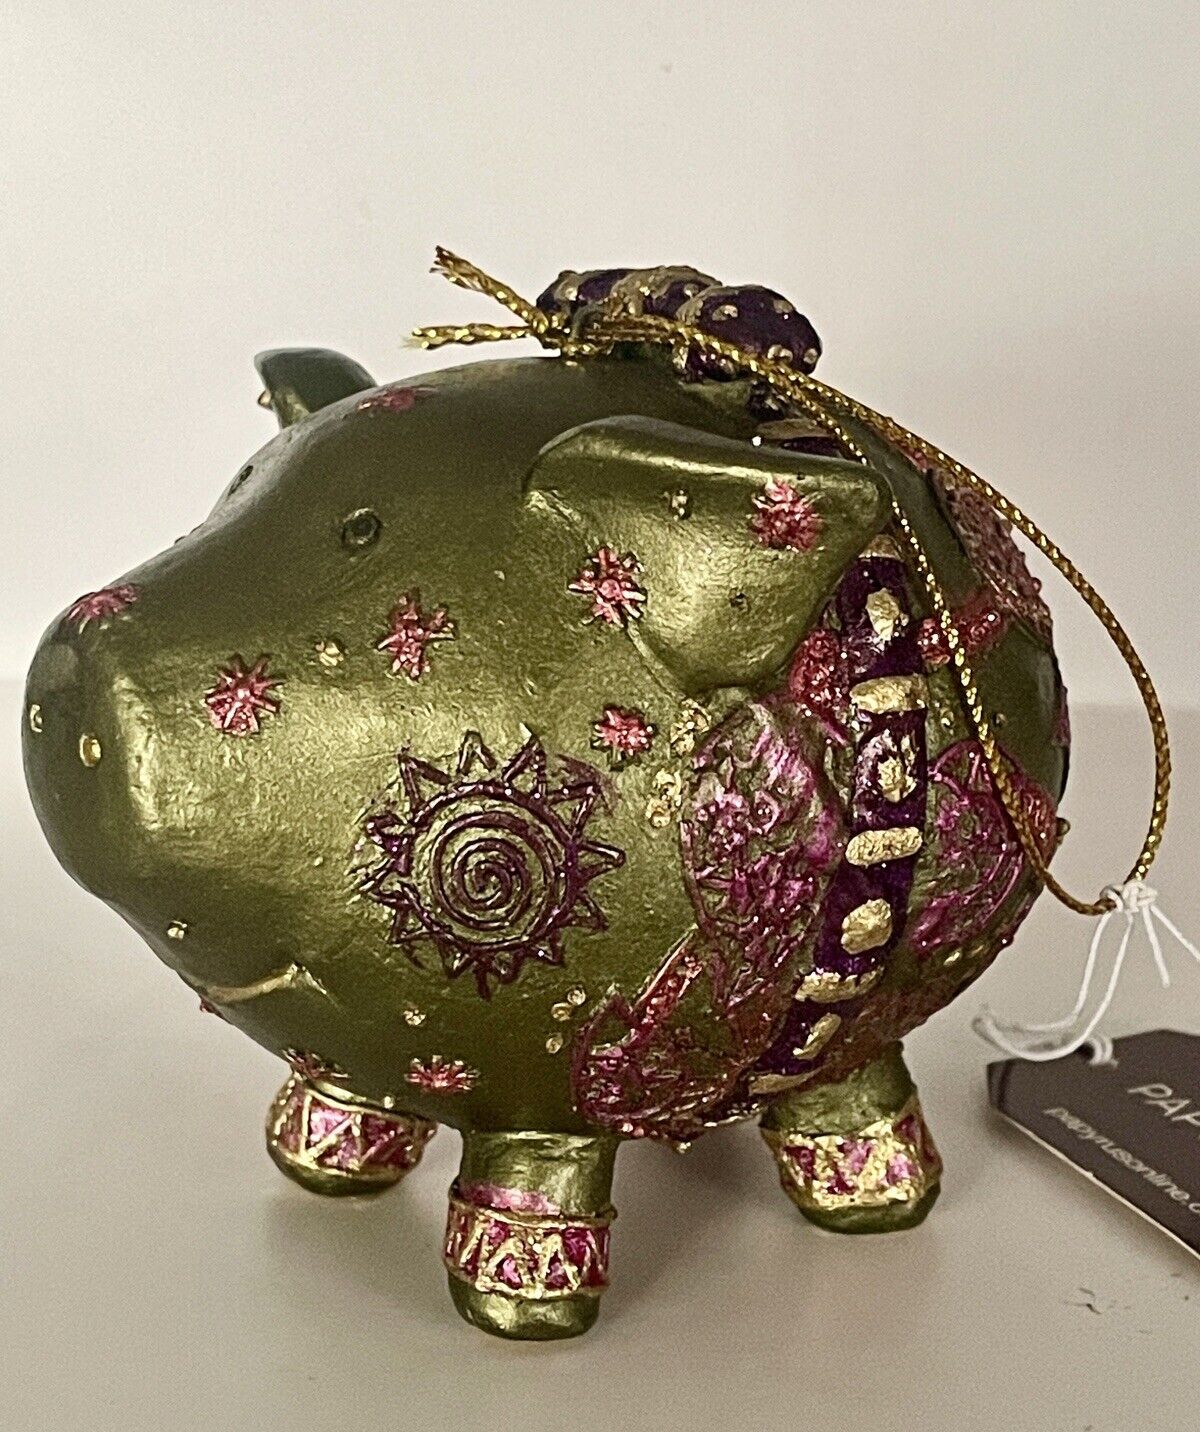 PAPYRUS PIG GLITTERY MULTICOLORED EMBELLISHED ORNAMENT NWT